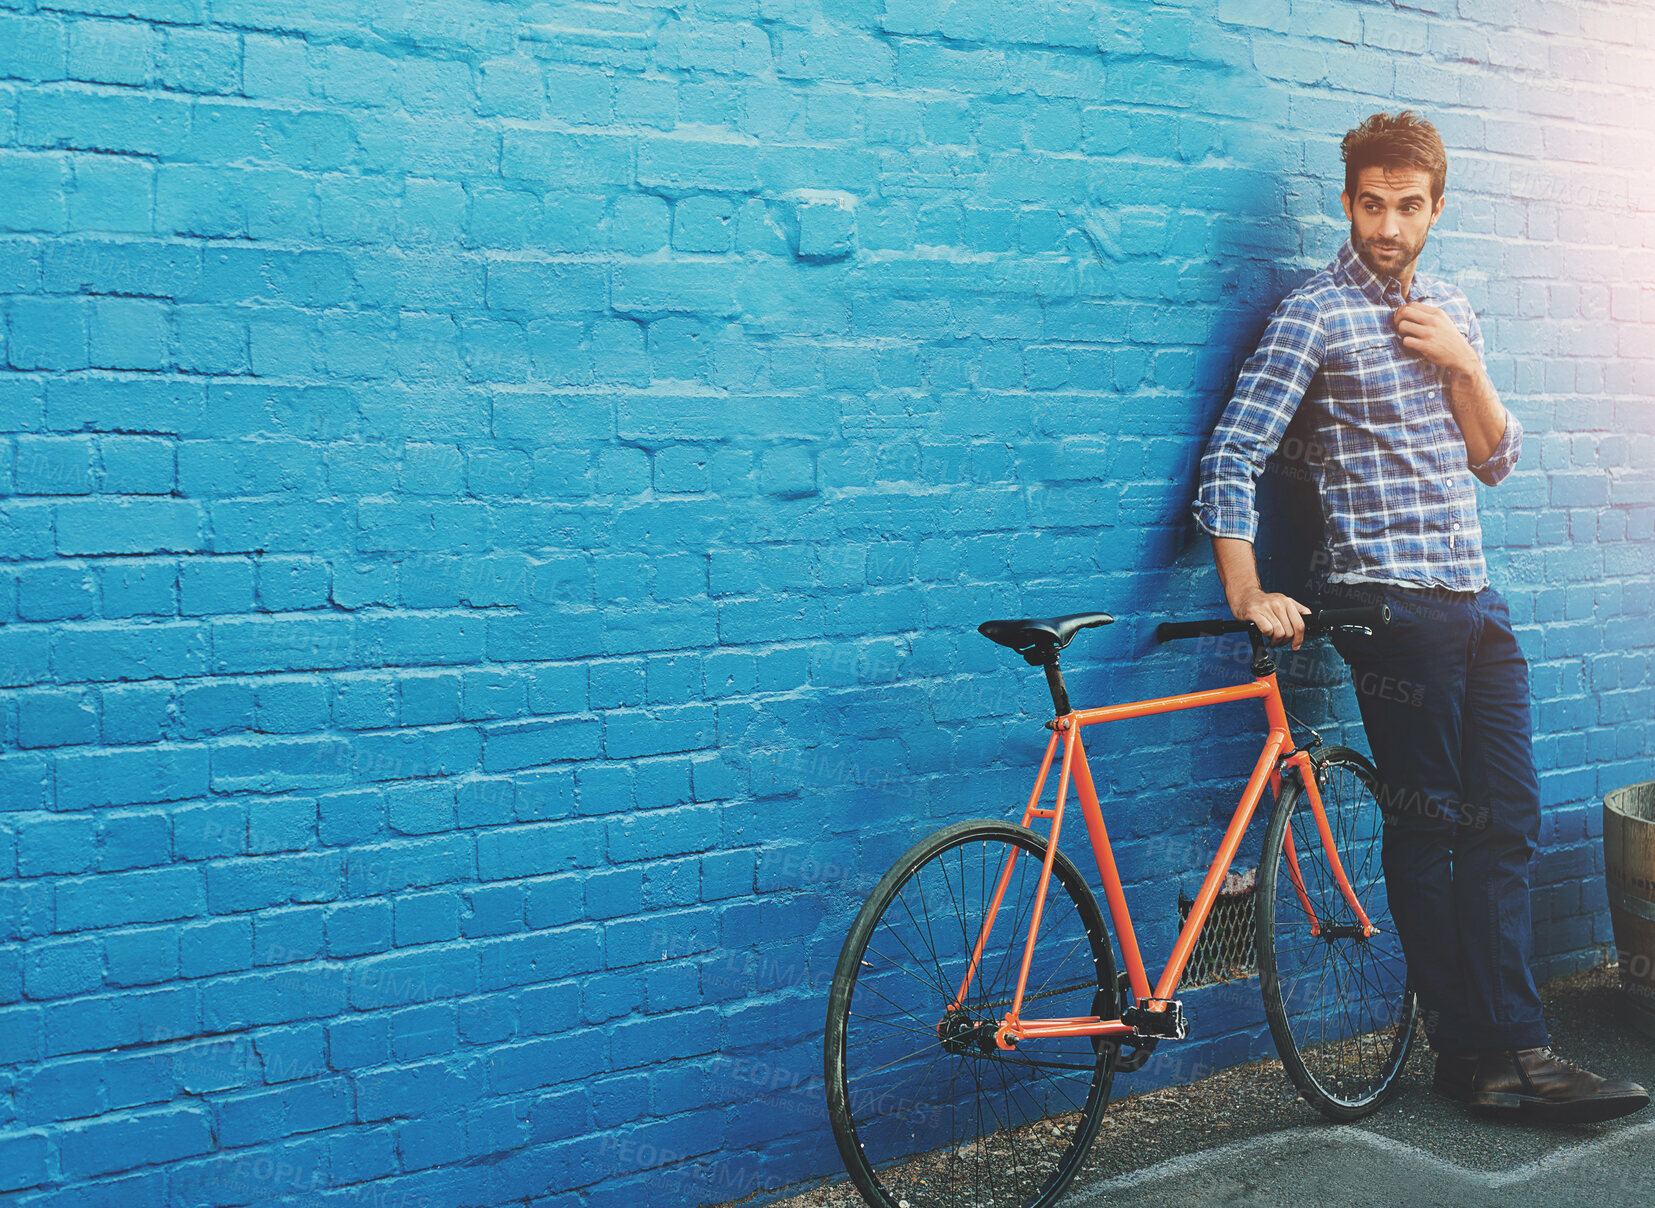 Buy stock photo Shot of a handsome young man posing with his bicycle against a blue wall